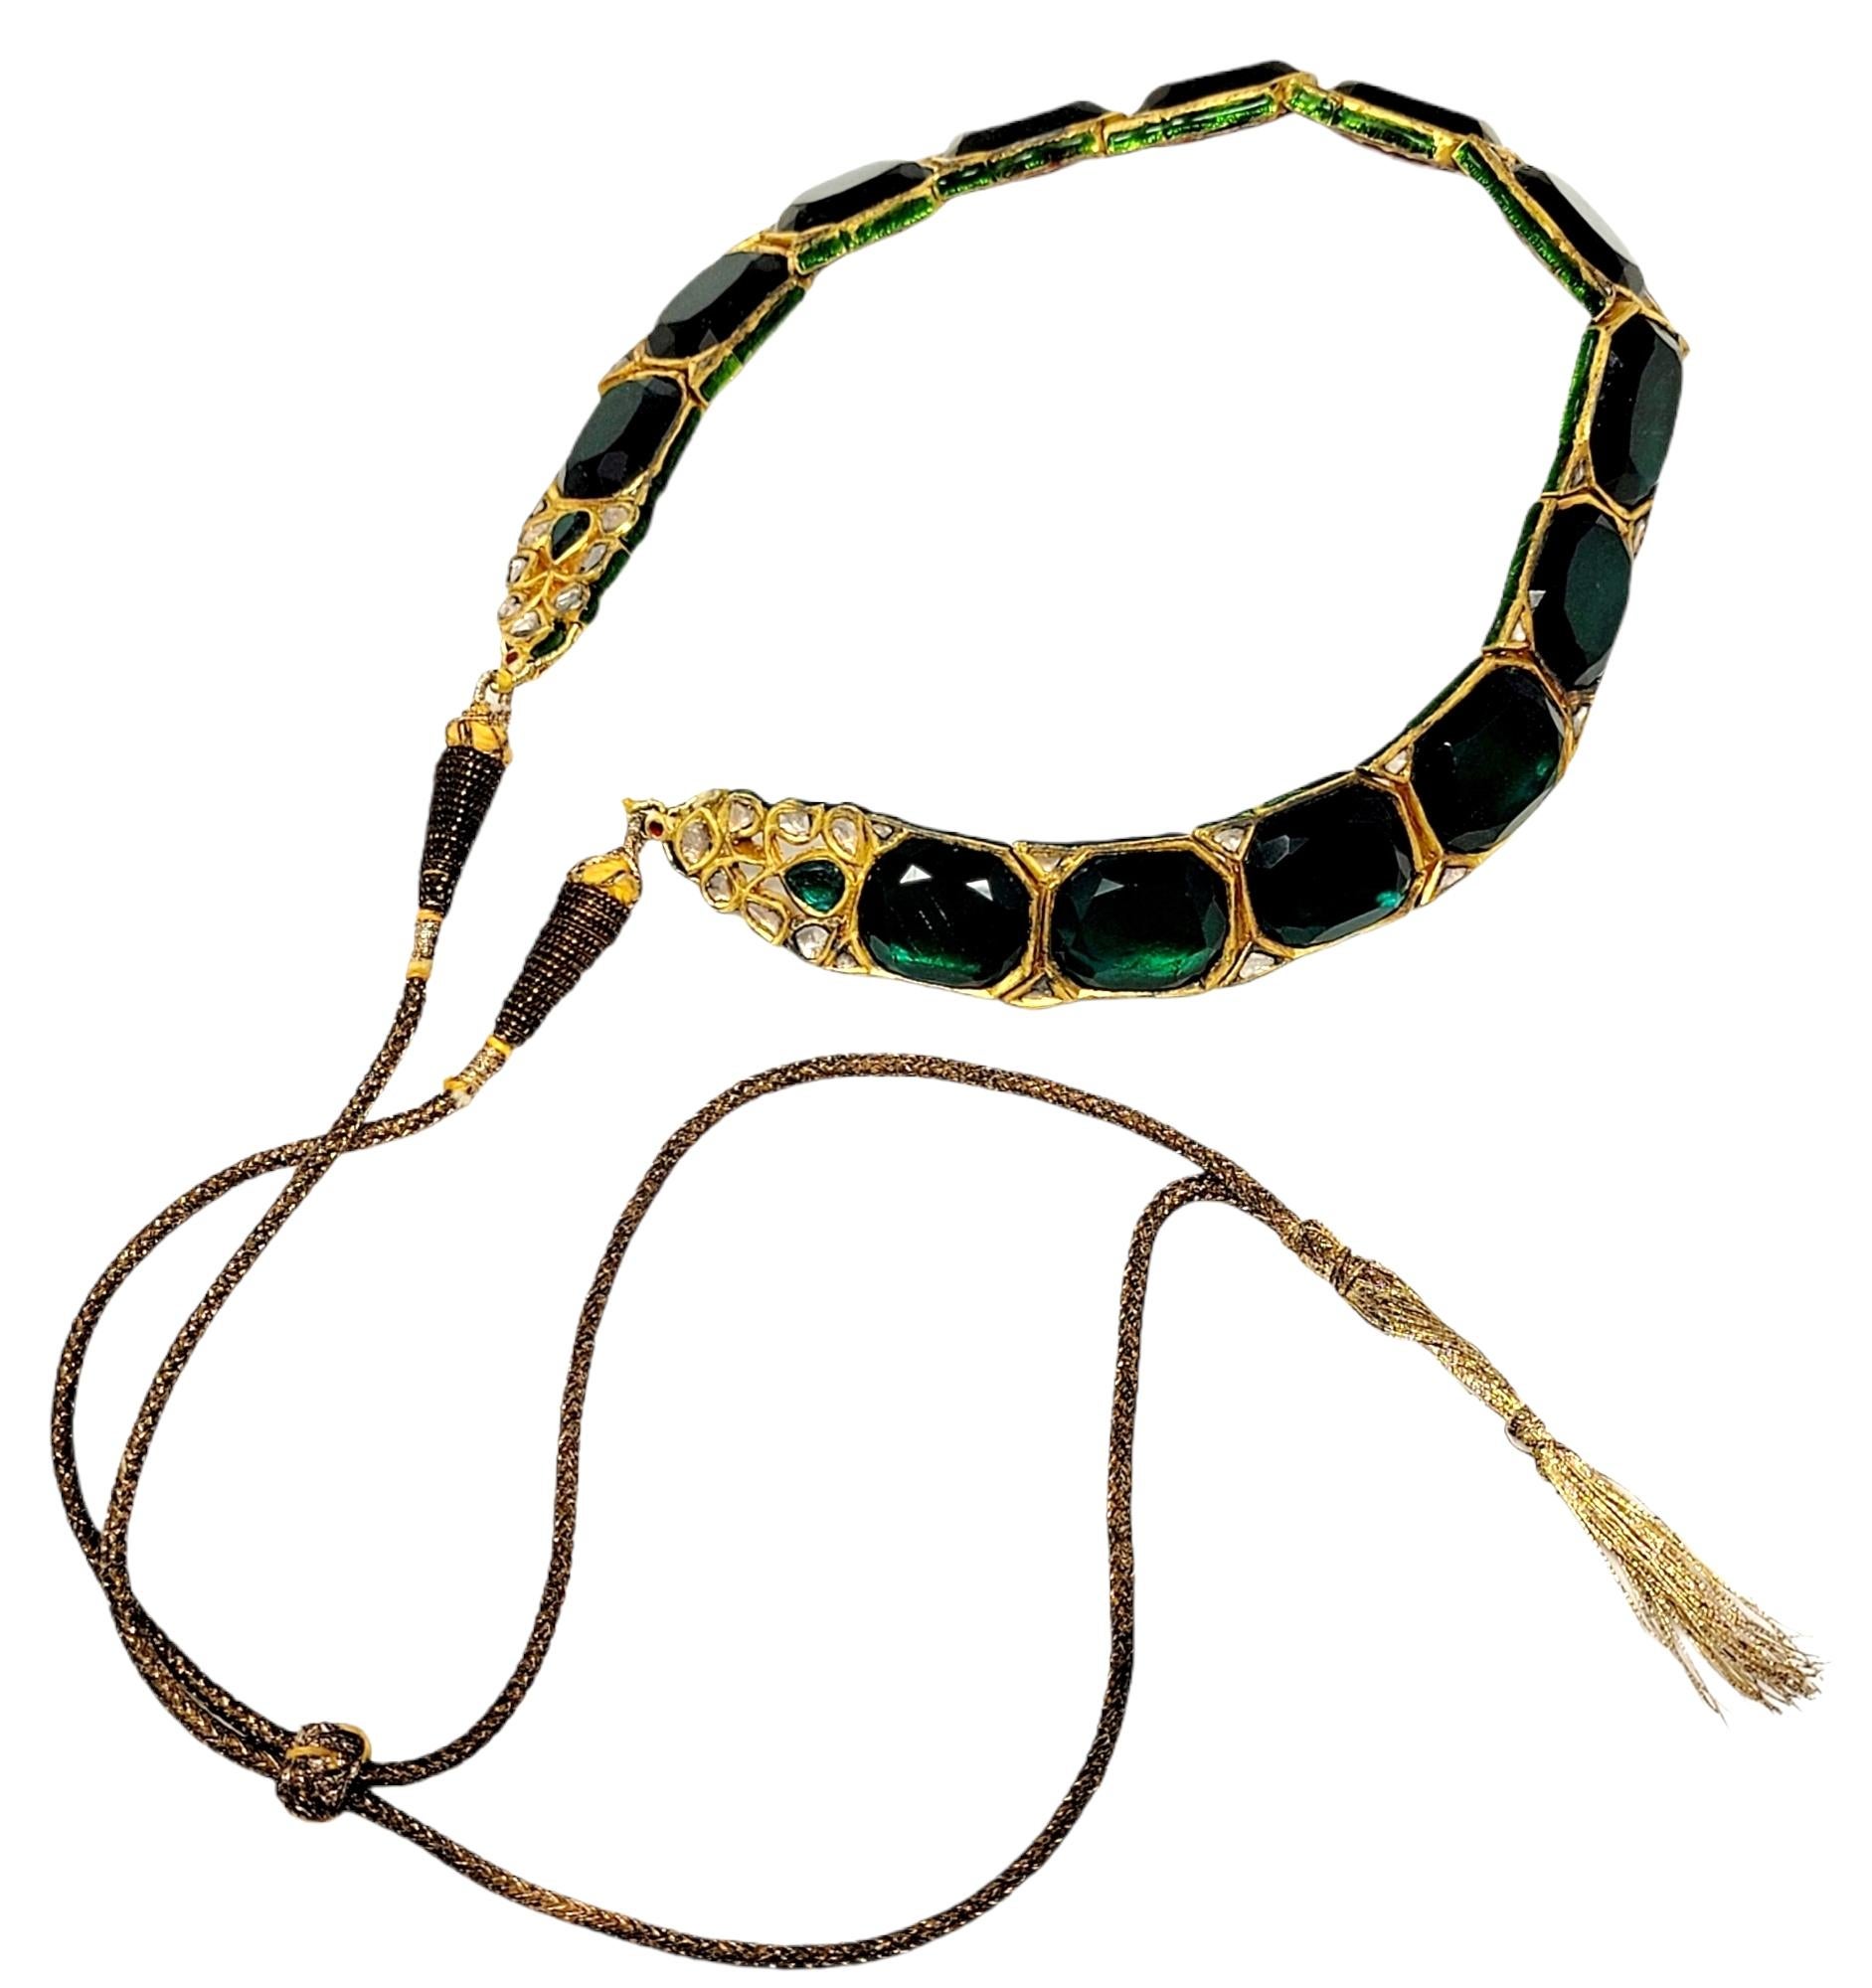 Vintage Hand Made Uncut Diamond and Green Glass Polki Necklace in 18 Karat Gold In Good Condition For Sale In Scottsdale, AZ